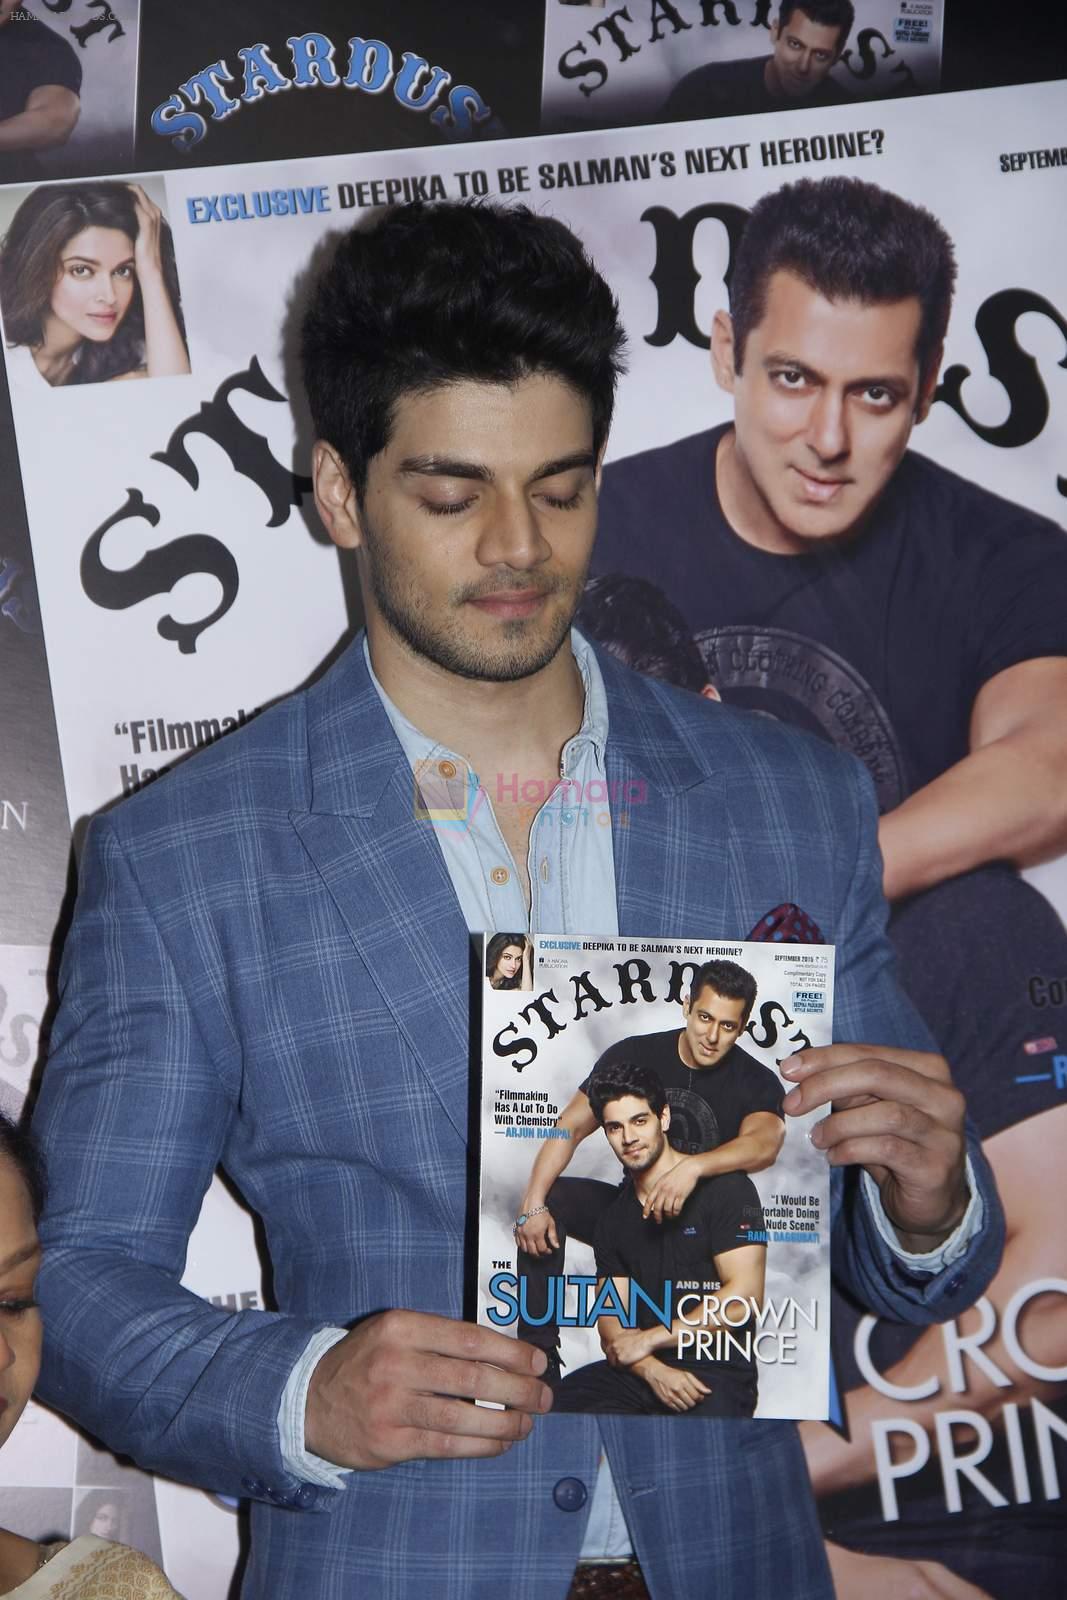 Sooraj pancholi at stardust cover launch in Mumbai on 26th Aug 2015